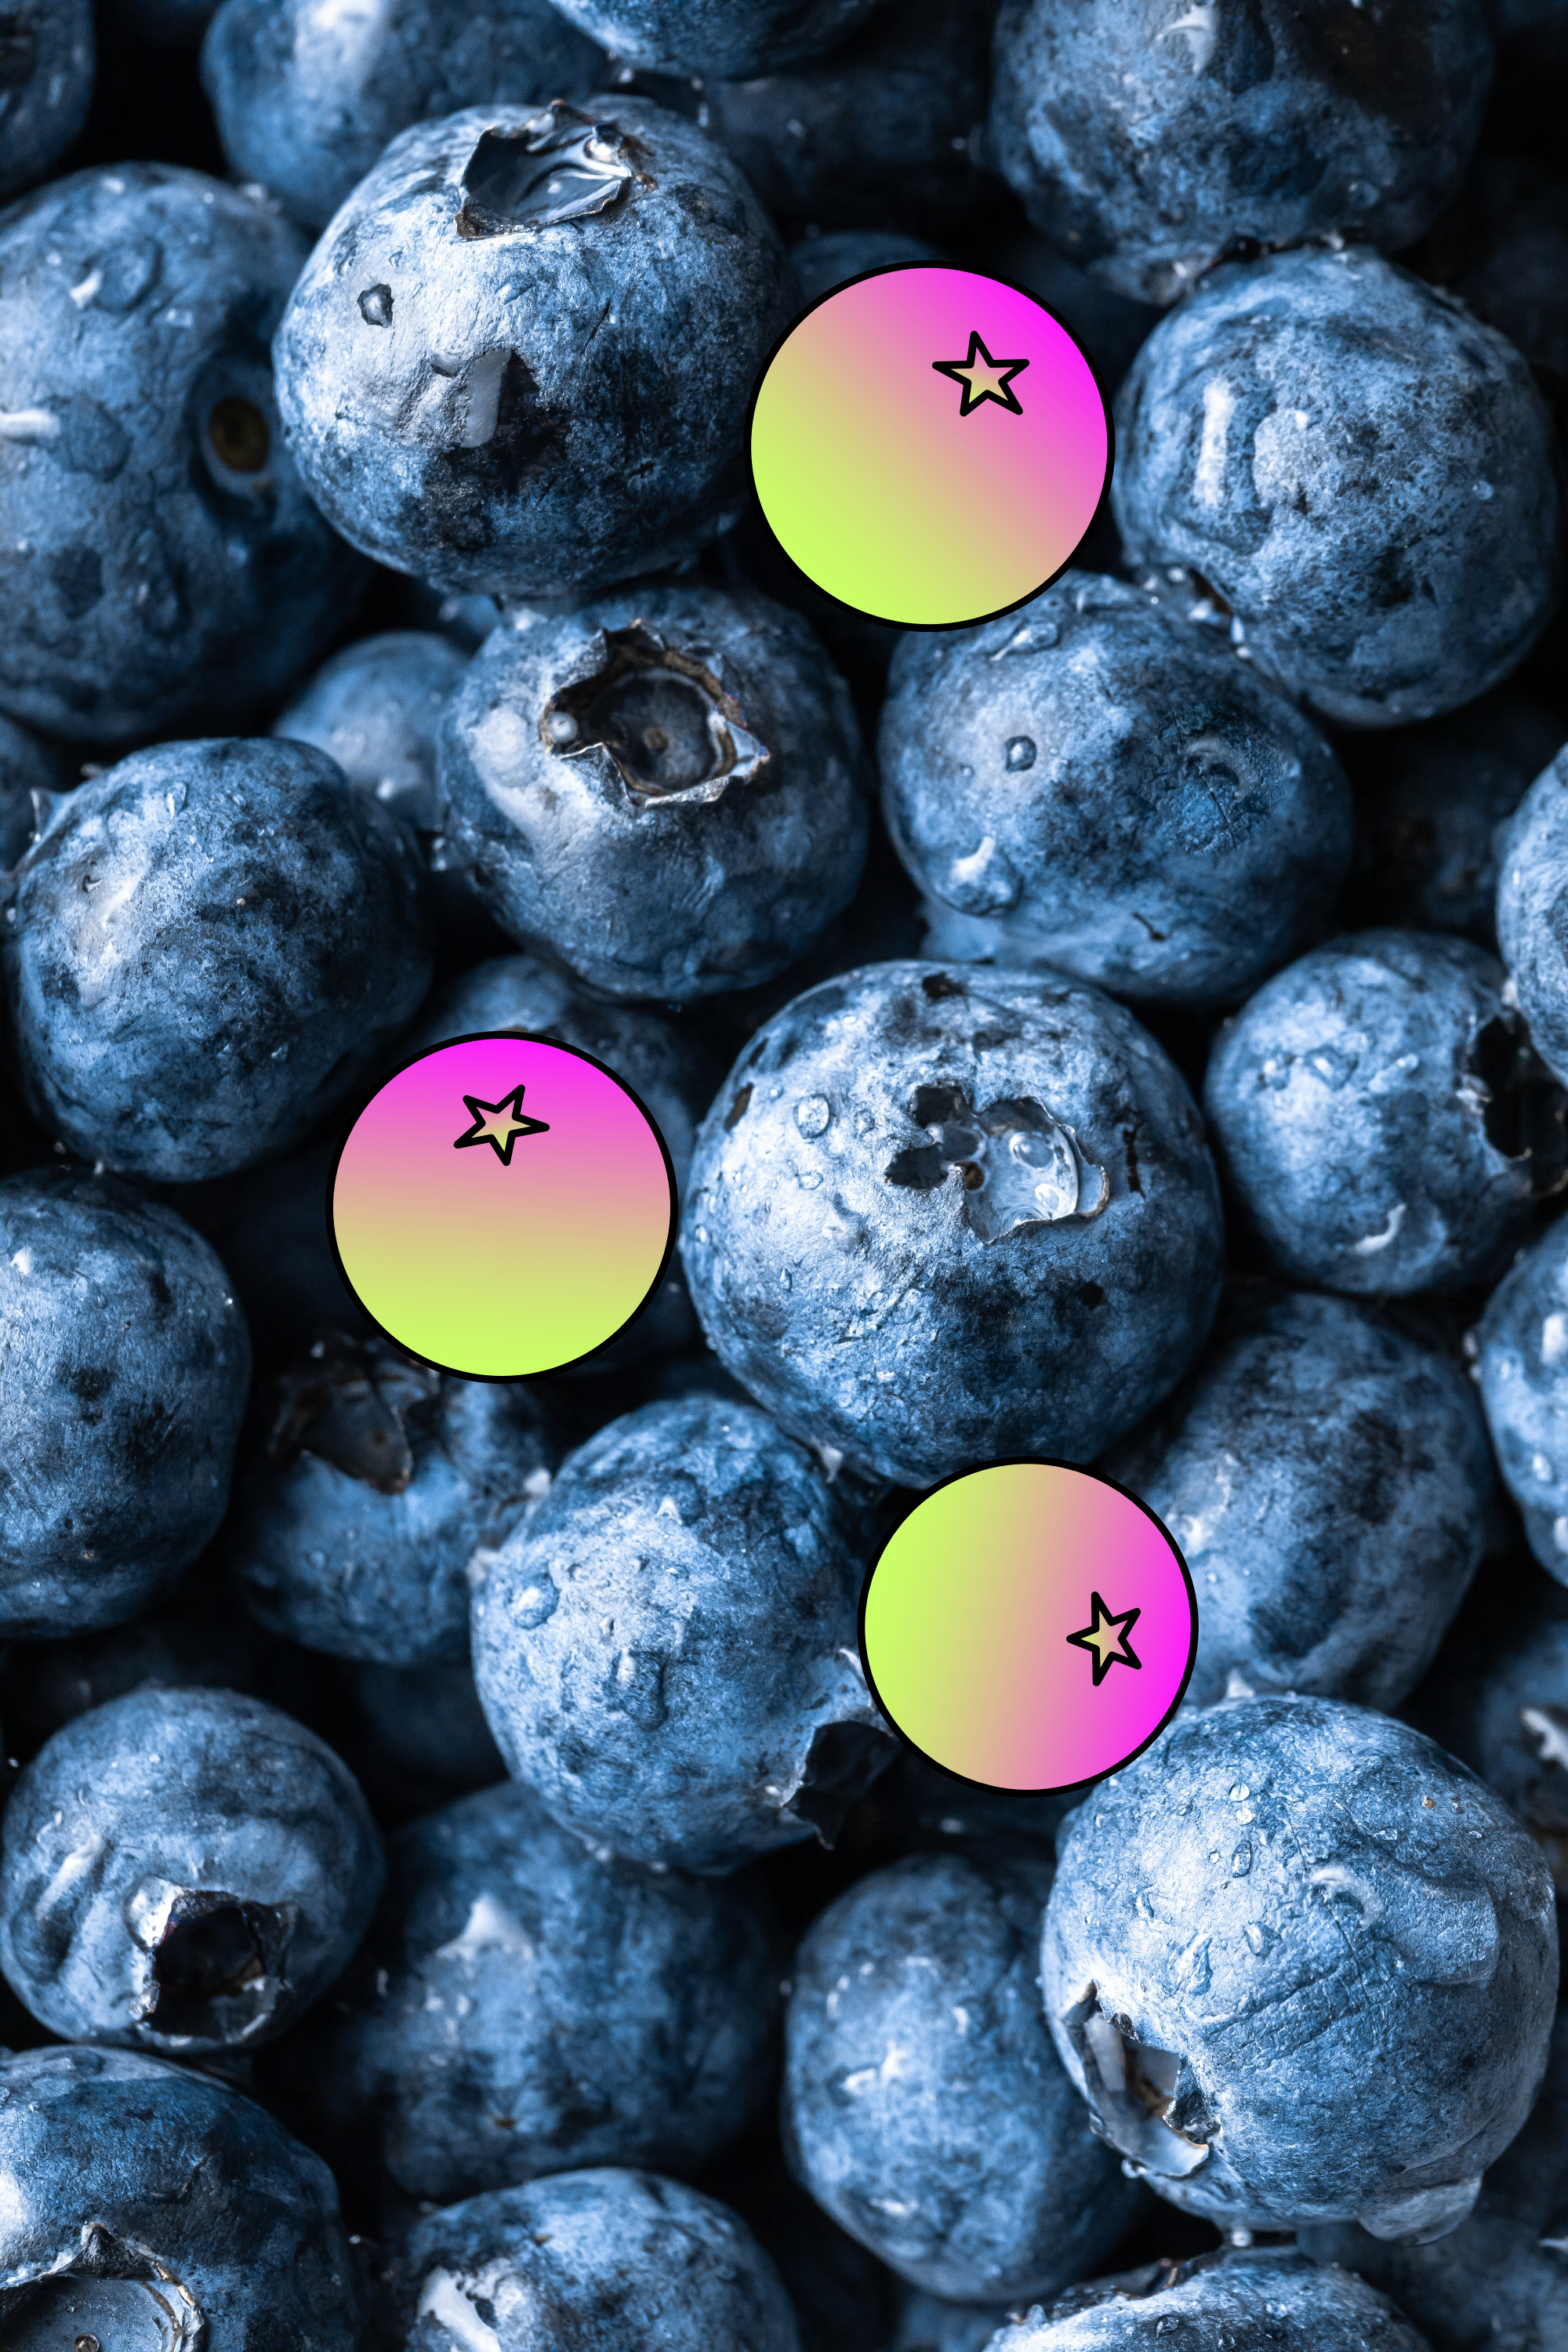 Close-up of blueberries with added trooberries (fictional multicolored berries with stars) interspersed among them.